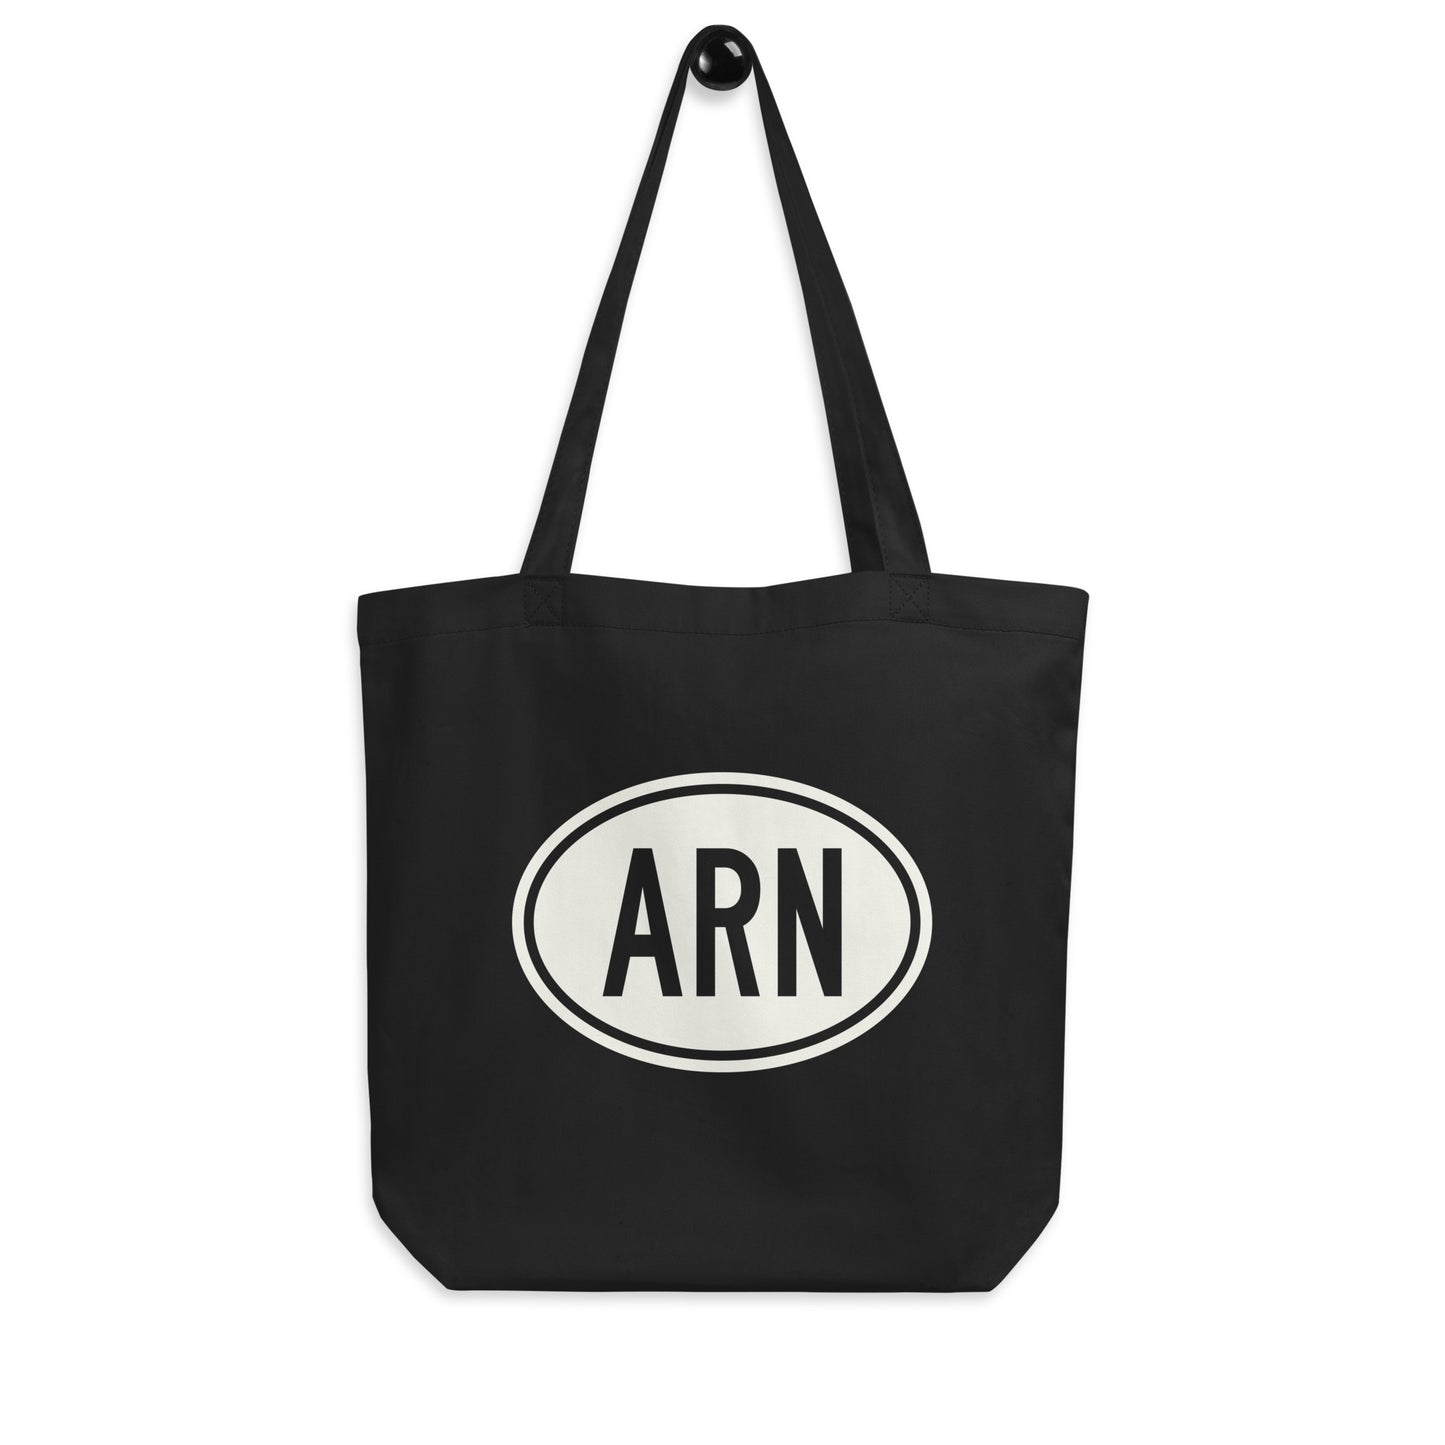 Unique Travel Gift Organic Tote - White Oval • ARN Stockholm • YHM Designs - Image 04